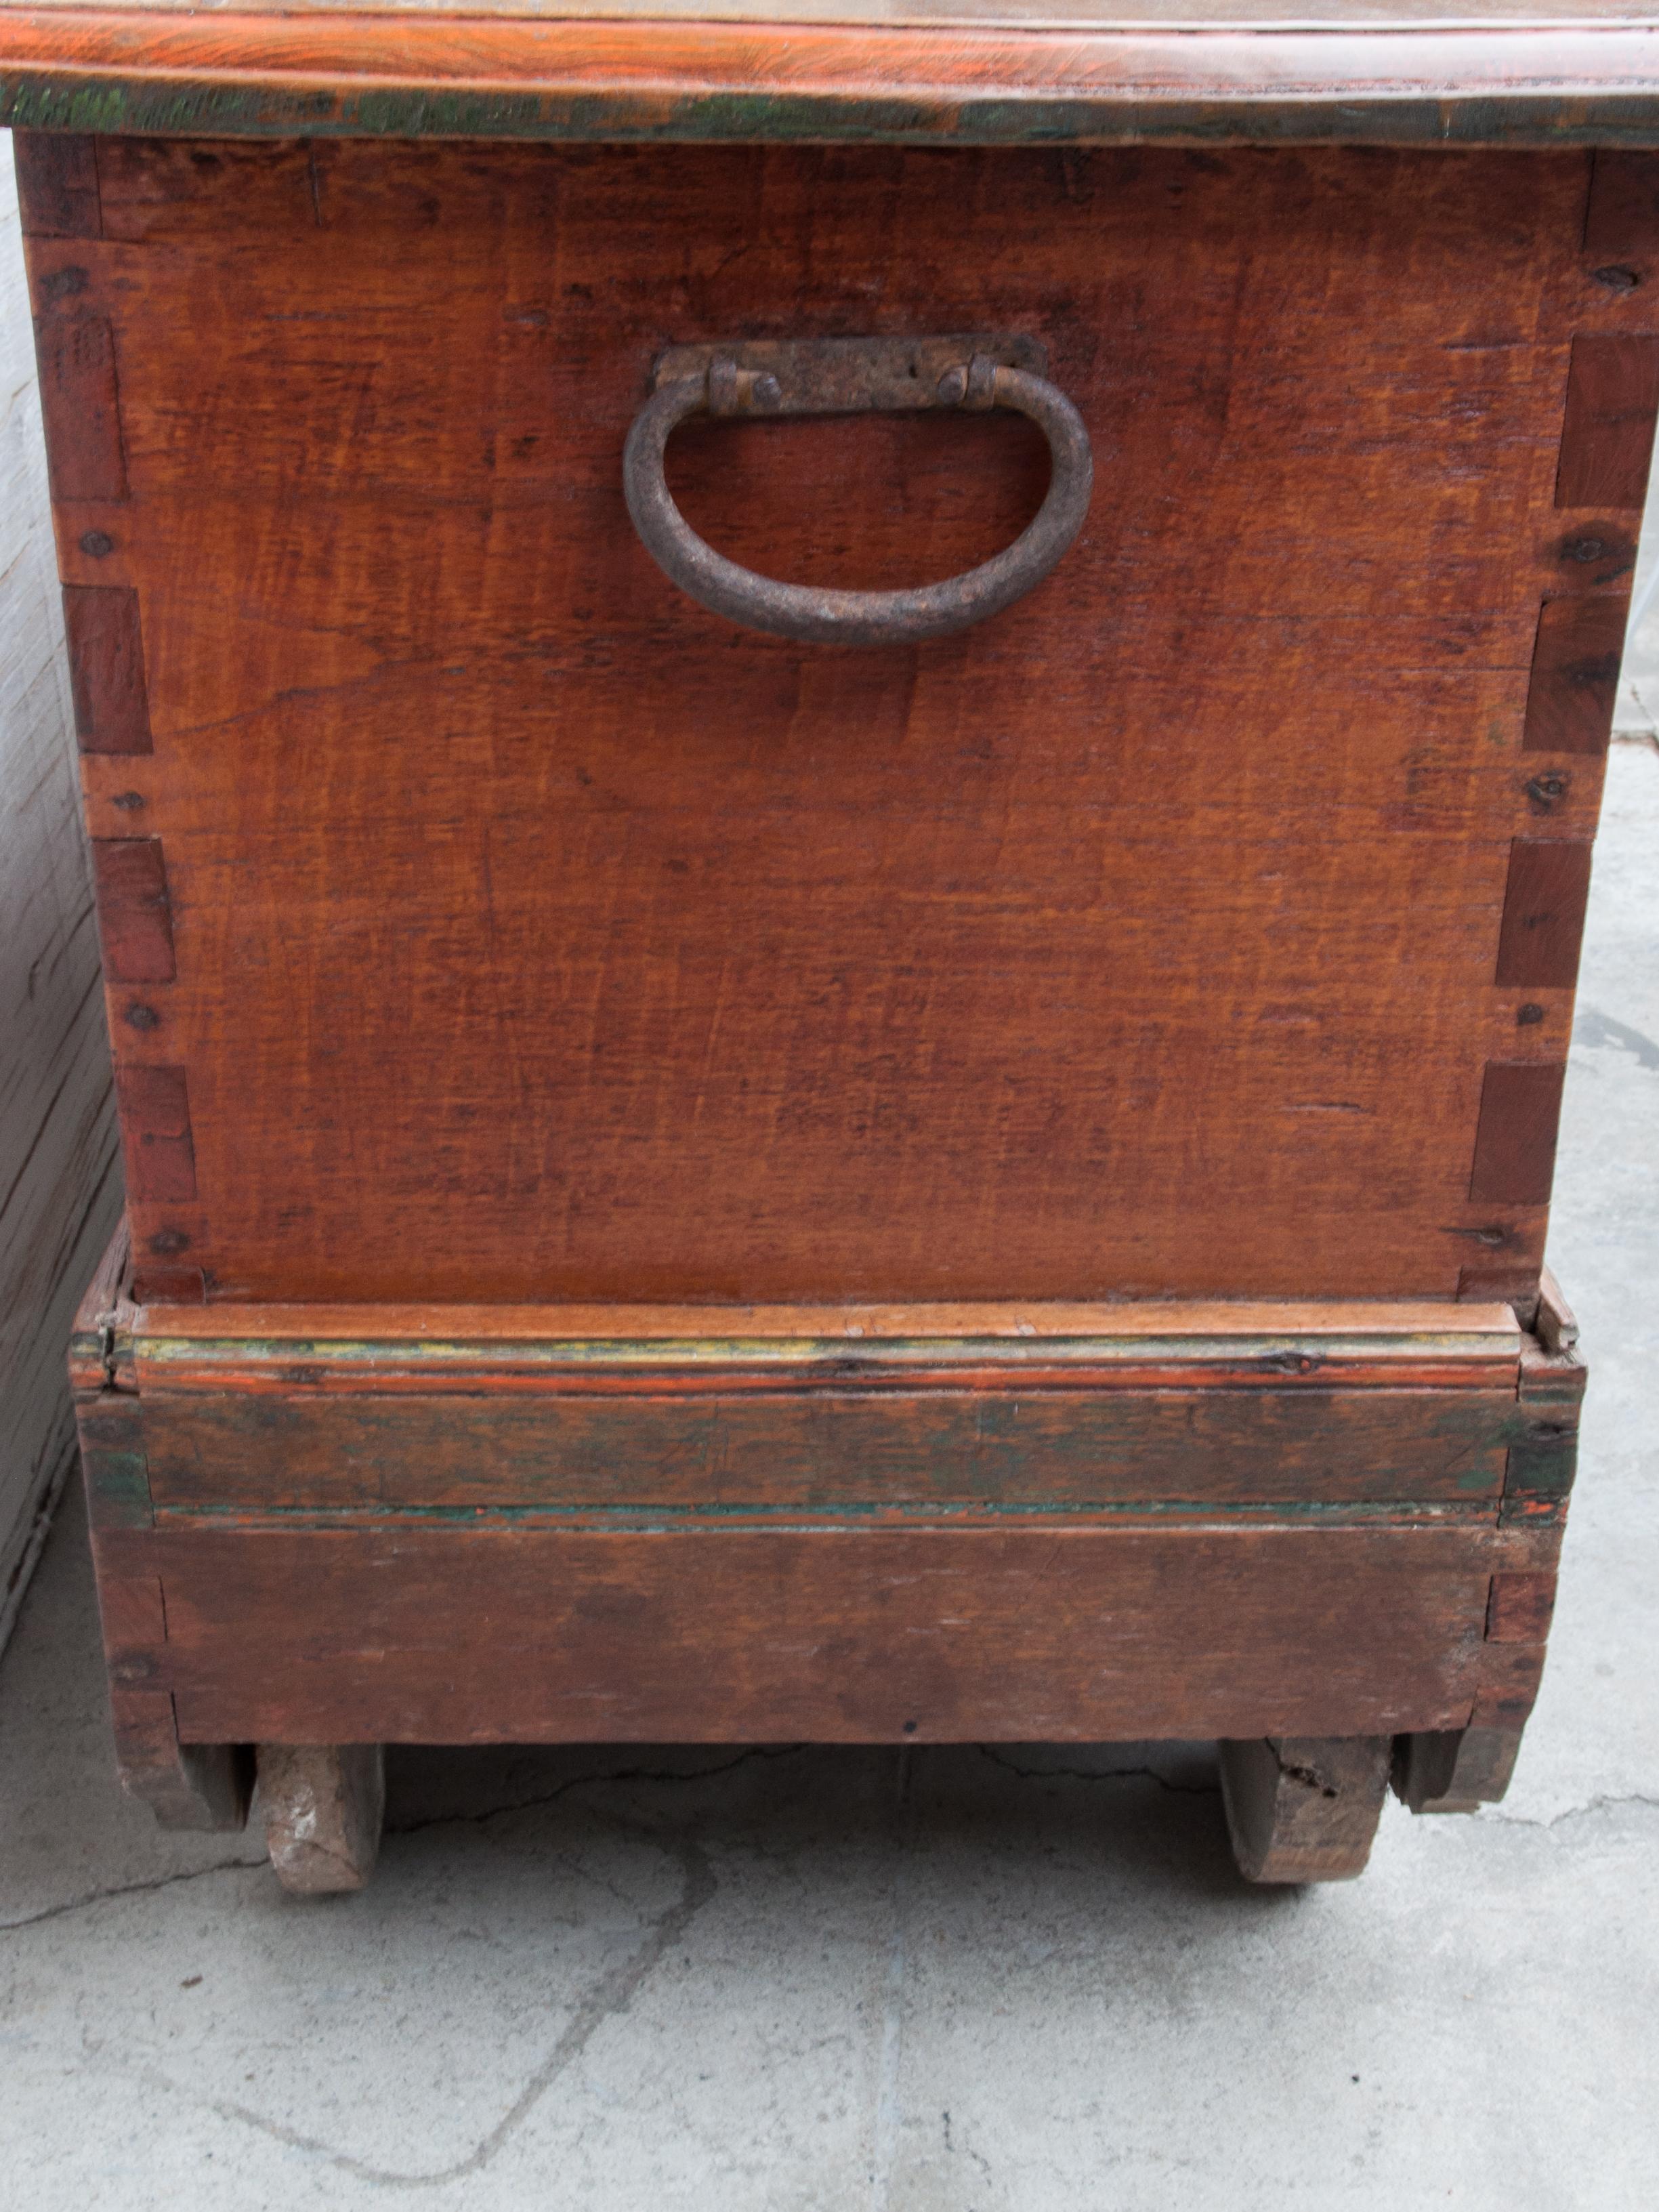 Mid-20th Century Teak Chest on Wheels from Java. Original Color and Hardware. 5